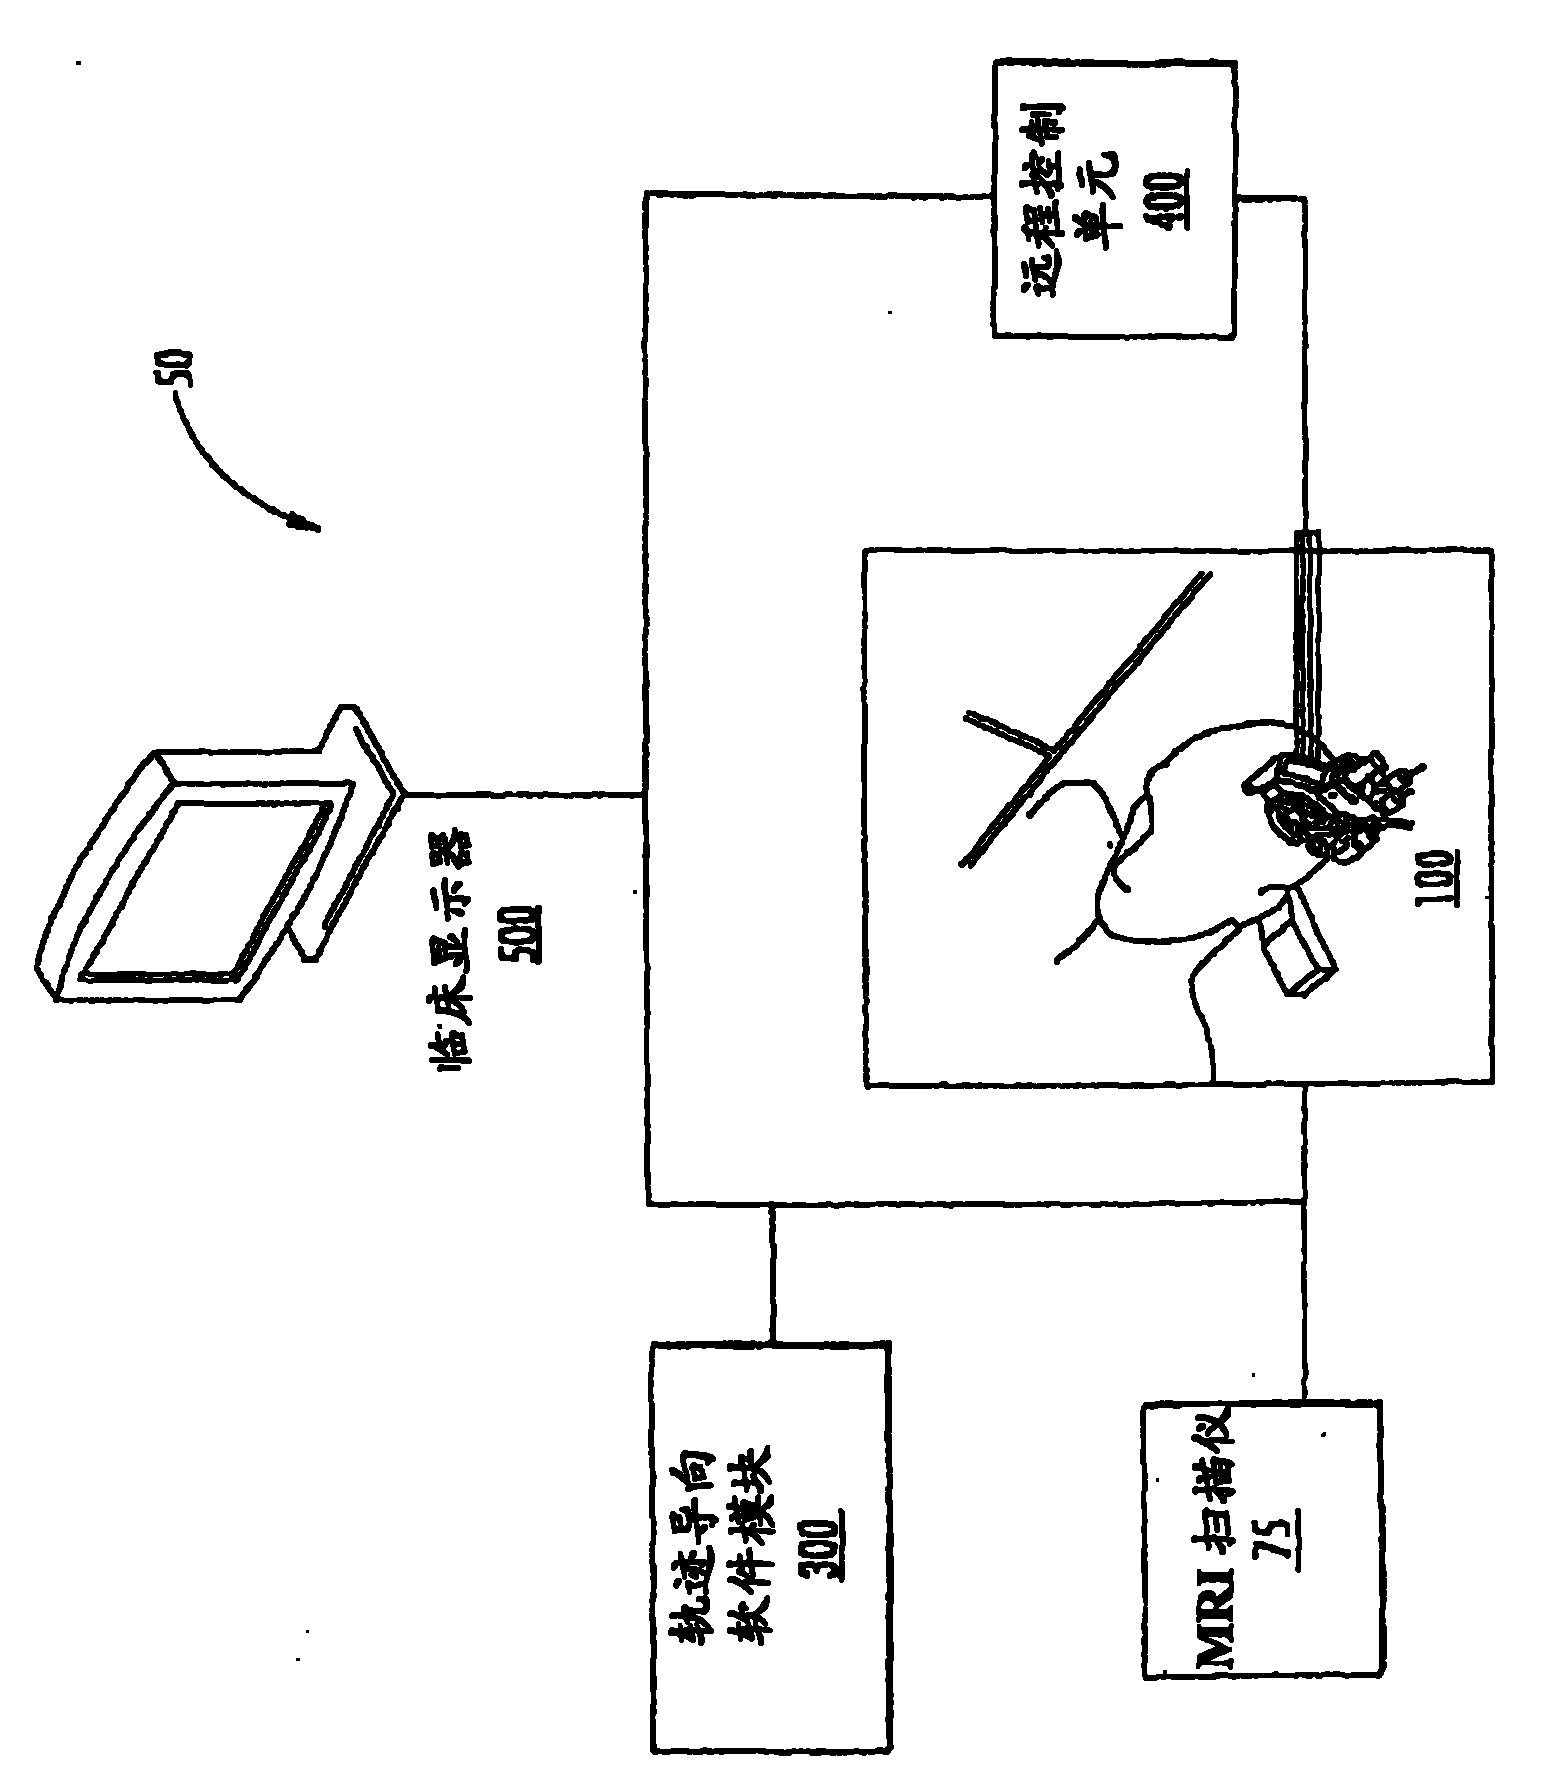 Mri-guided medical interventional systems and methods